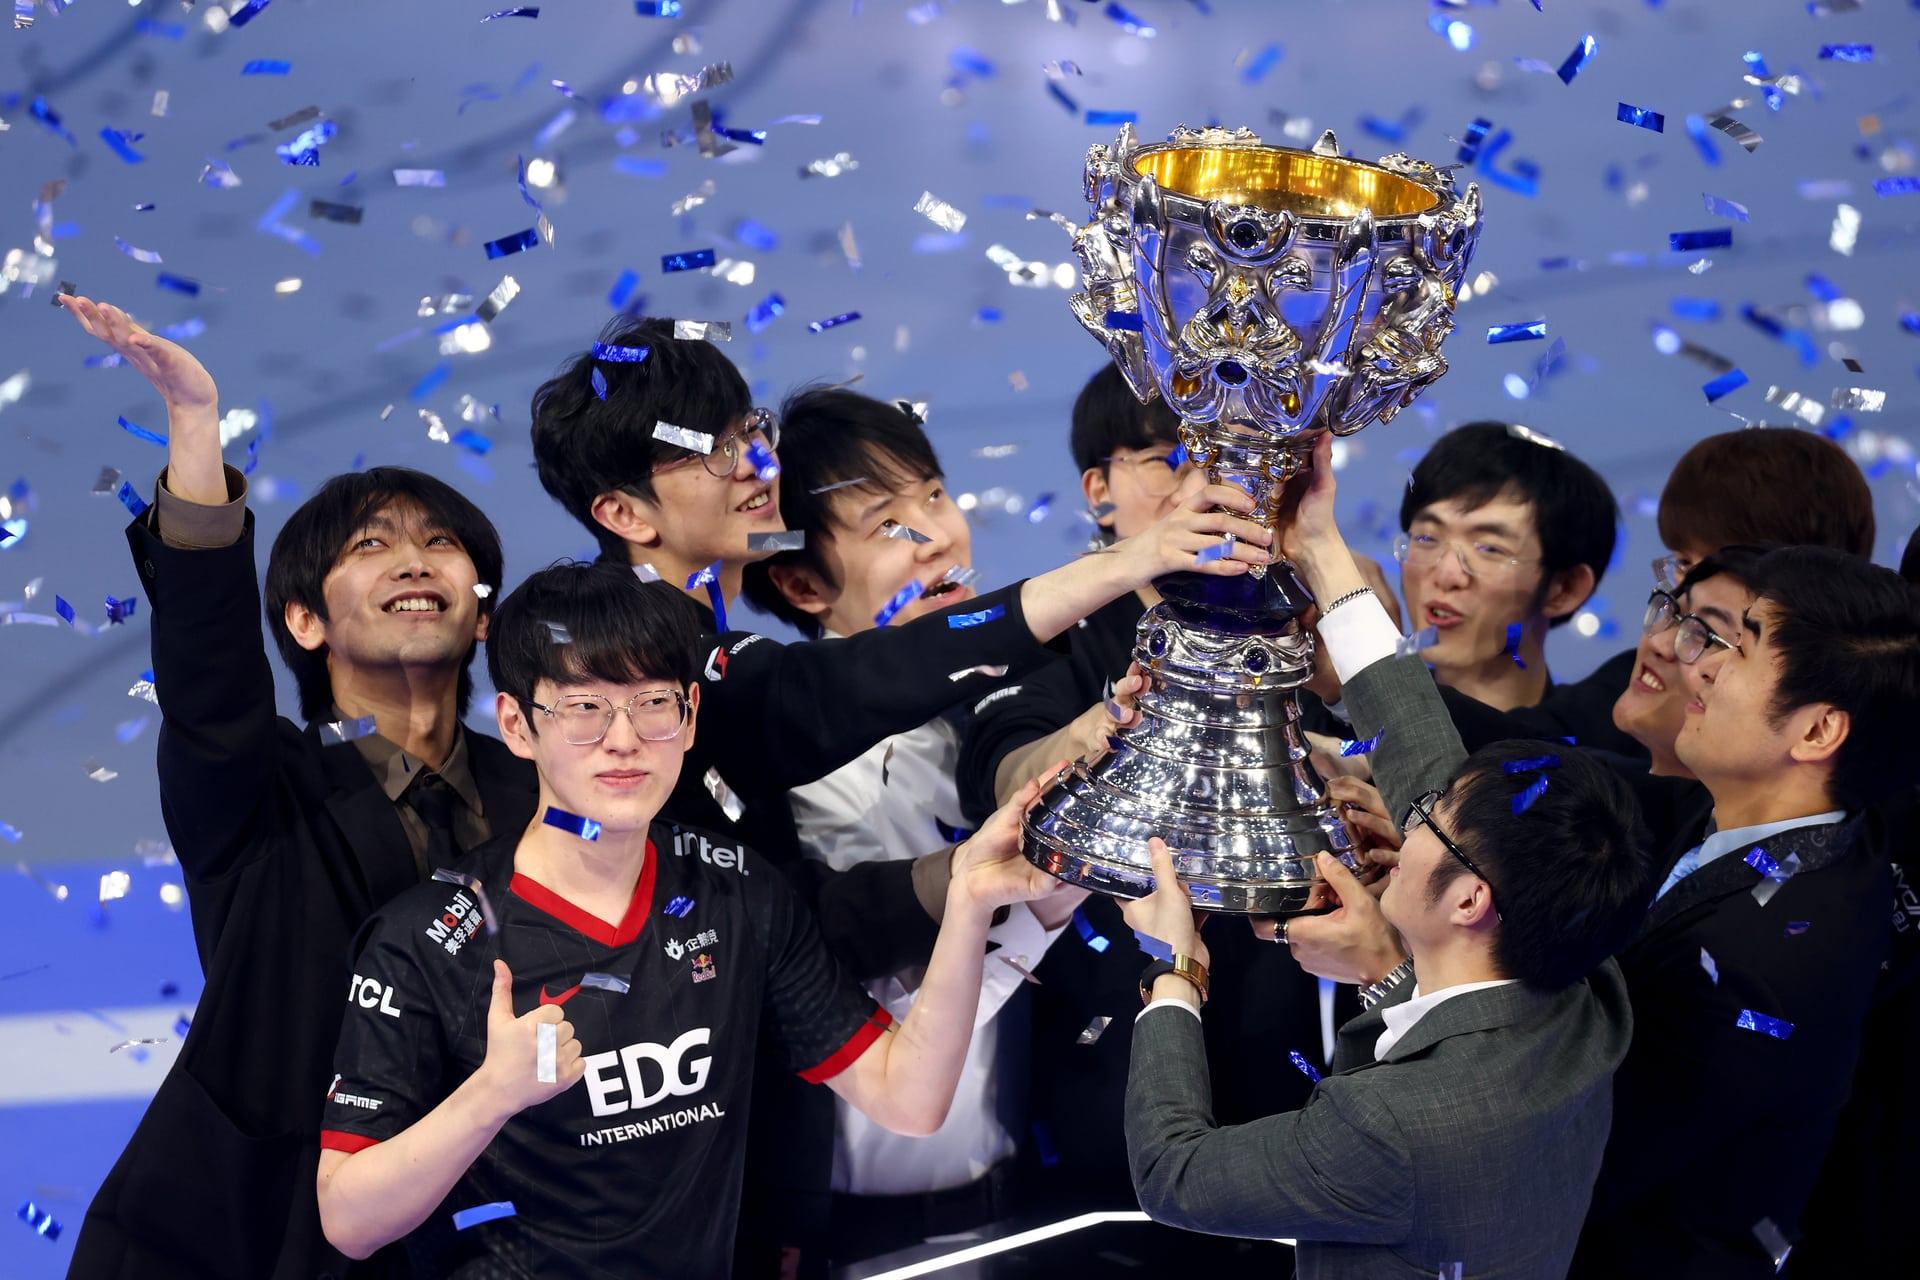 EDward gaming lifts Summoner's Cup after winning LoL Worlds 2021